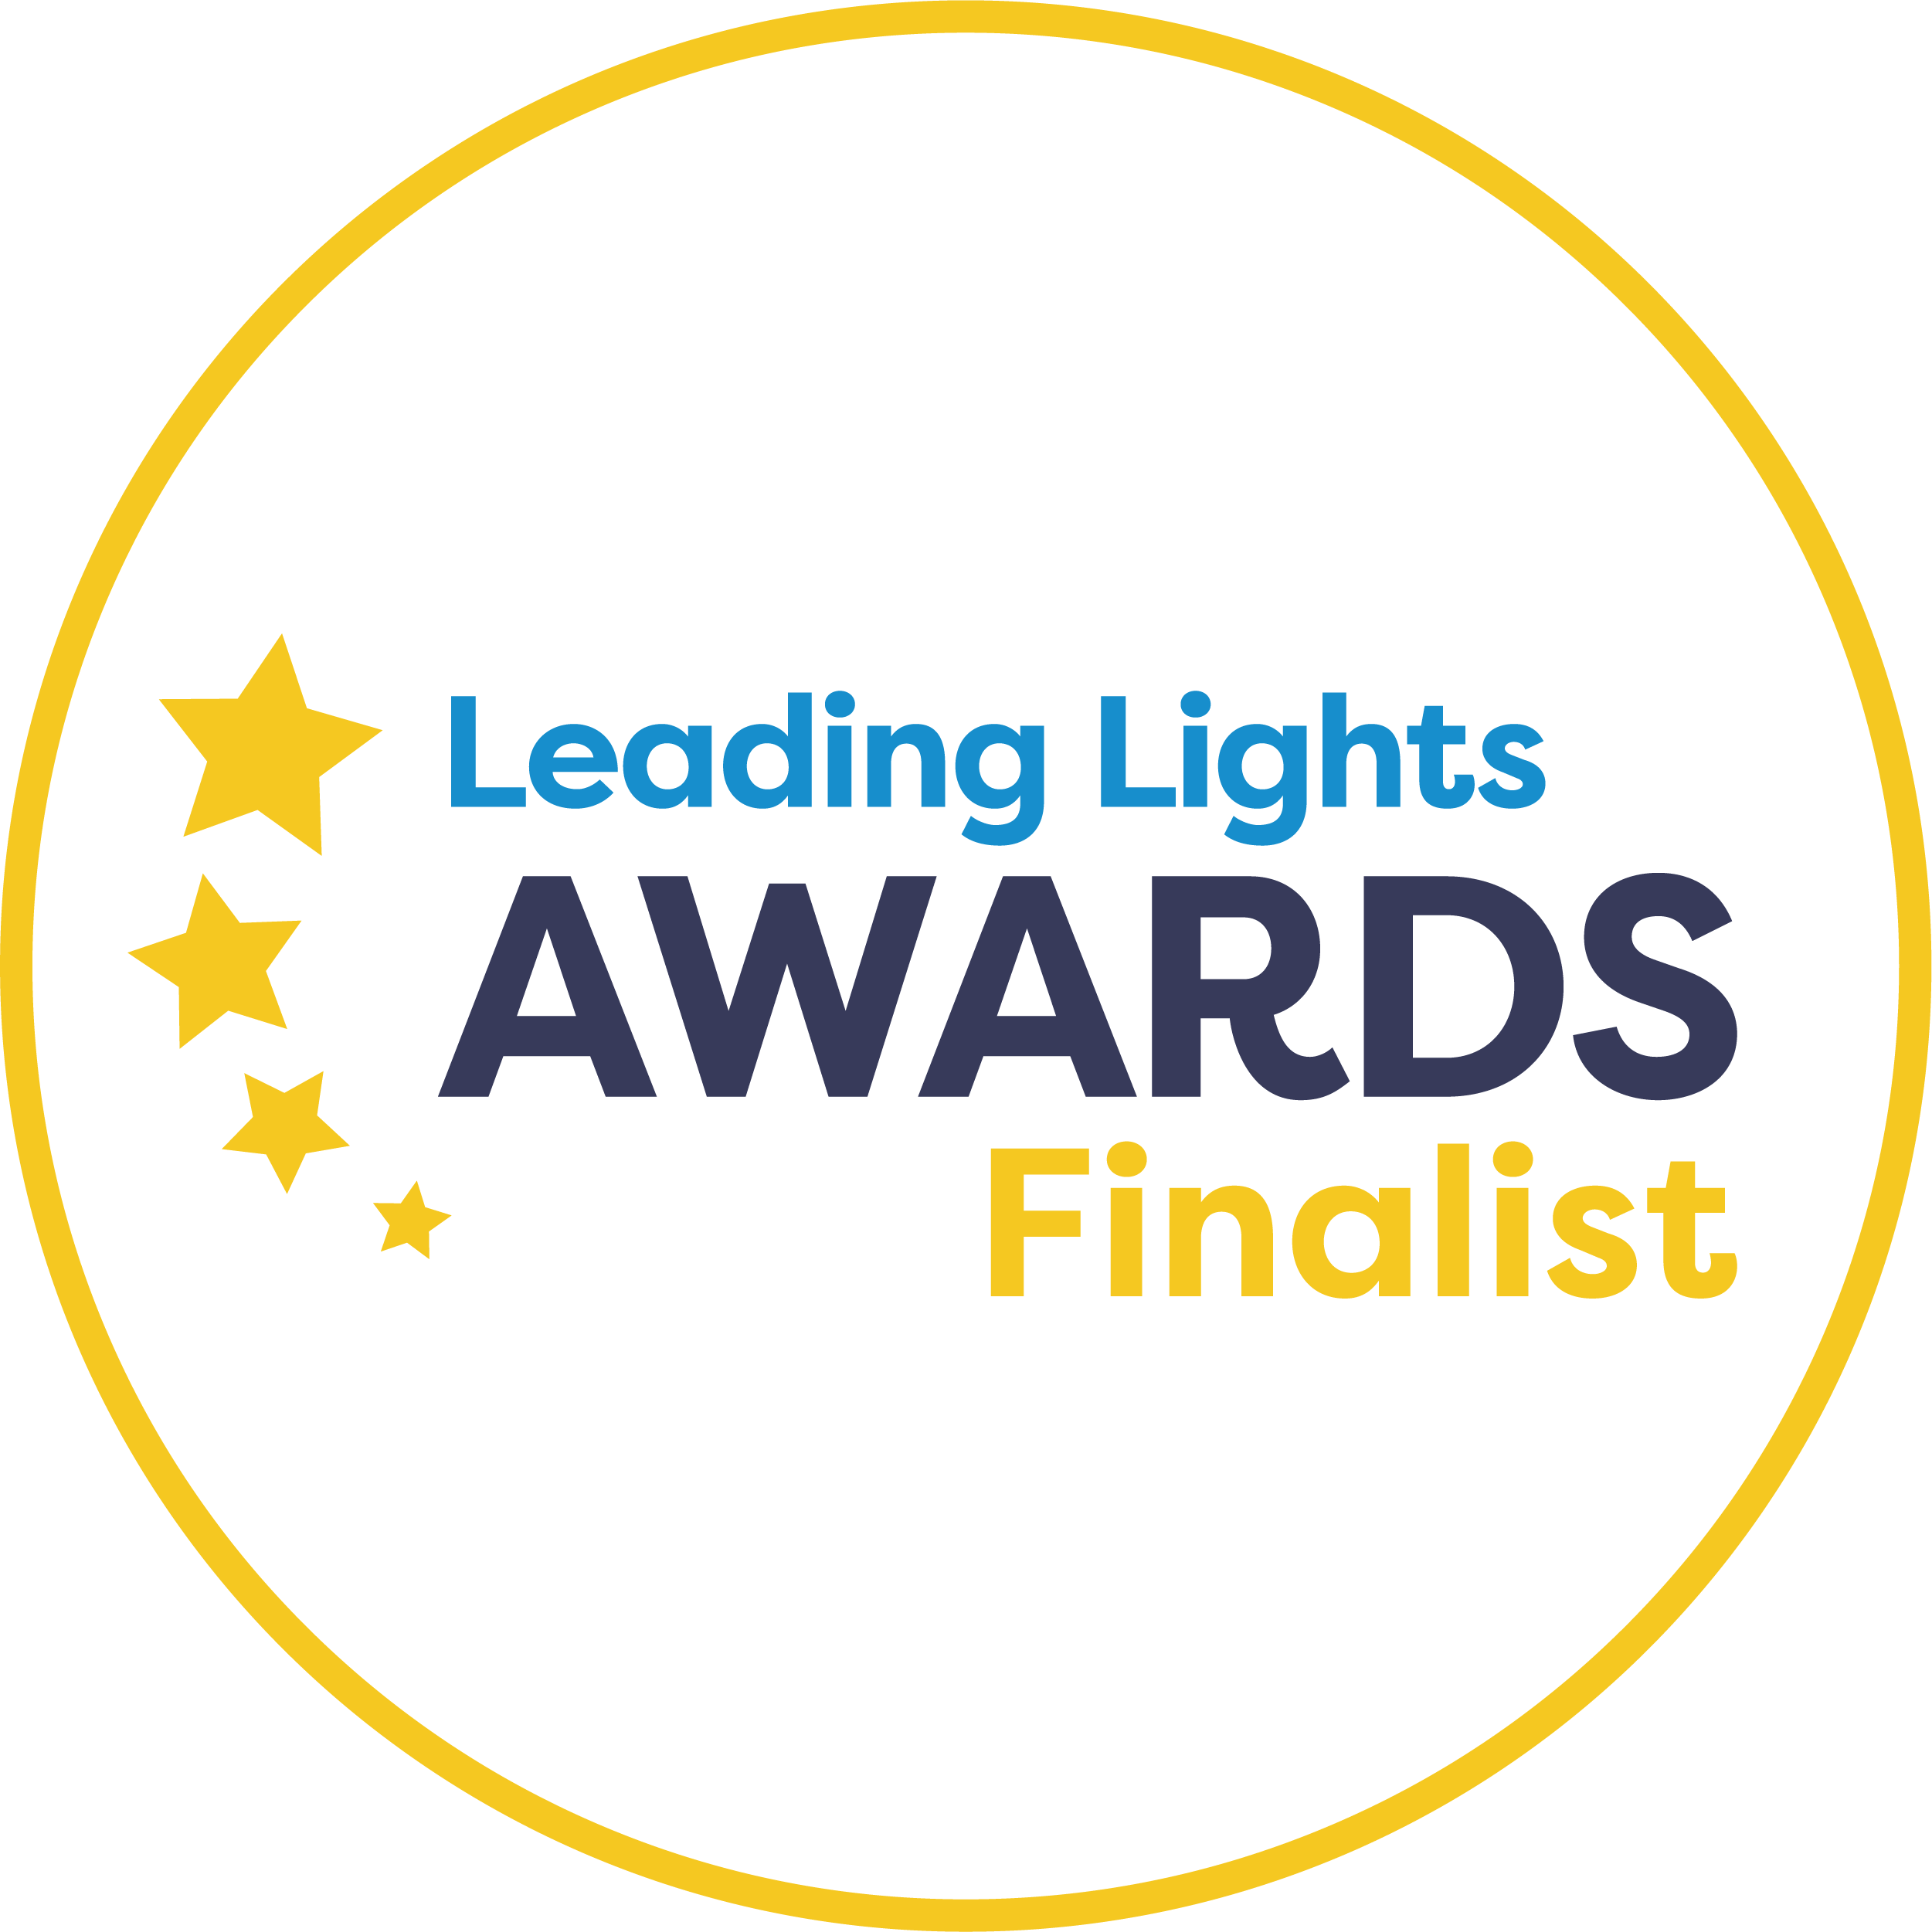 Catena selected as Finalist in Leading Lights Awards